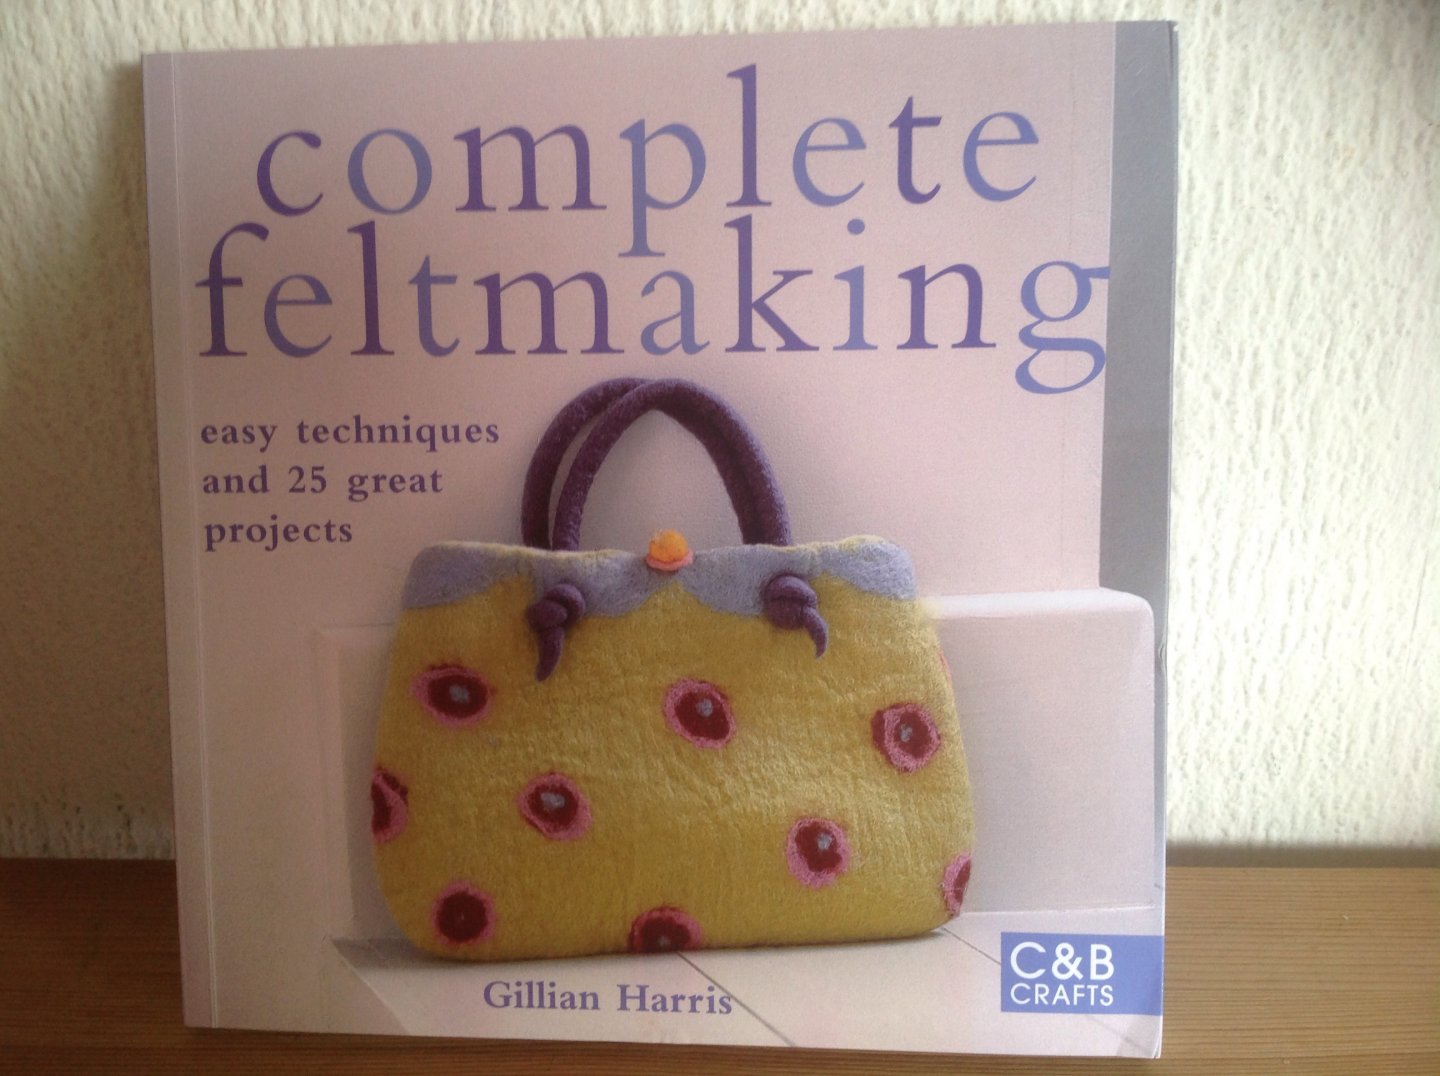 Harris, Gillian - Complete Feltmaking / Easy Techniques and 25 Great Projects